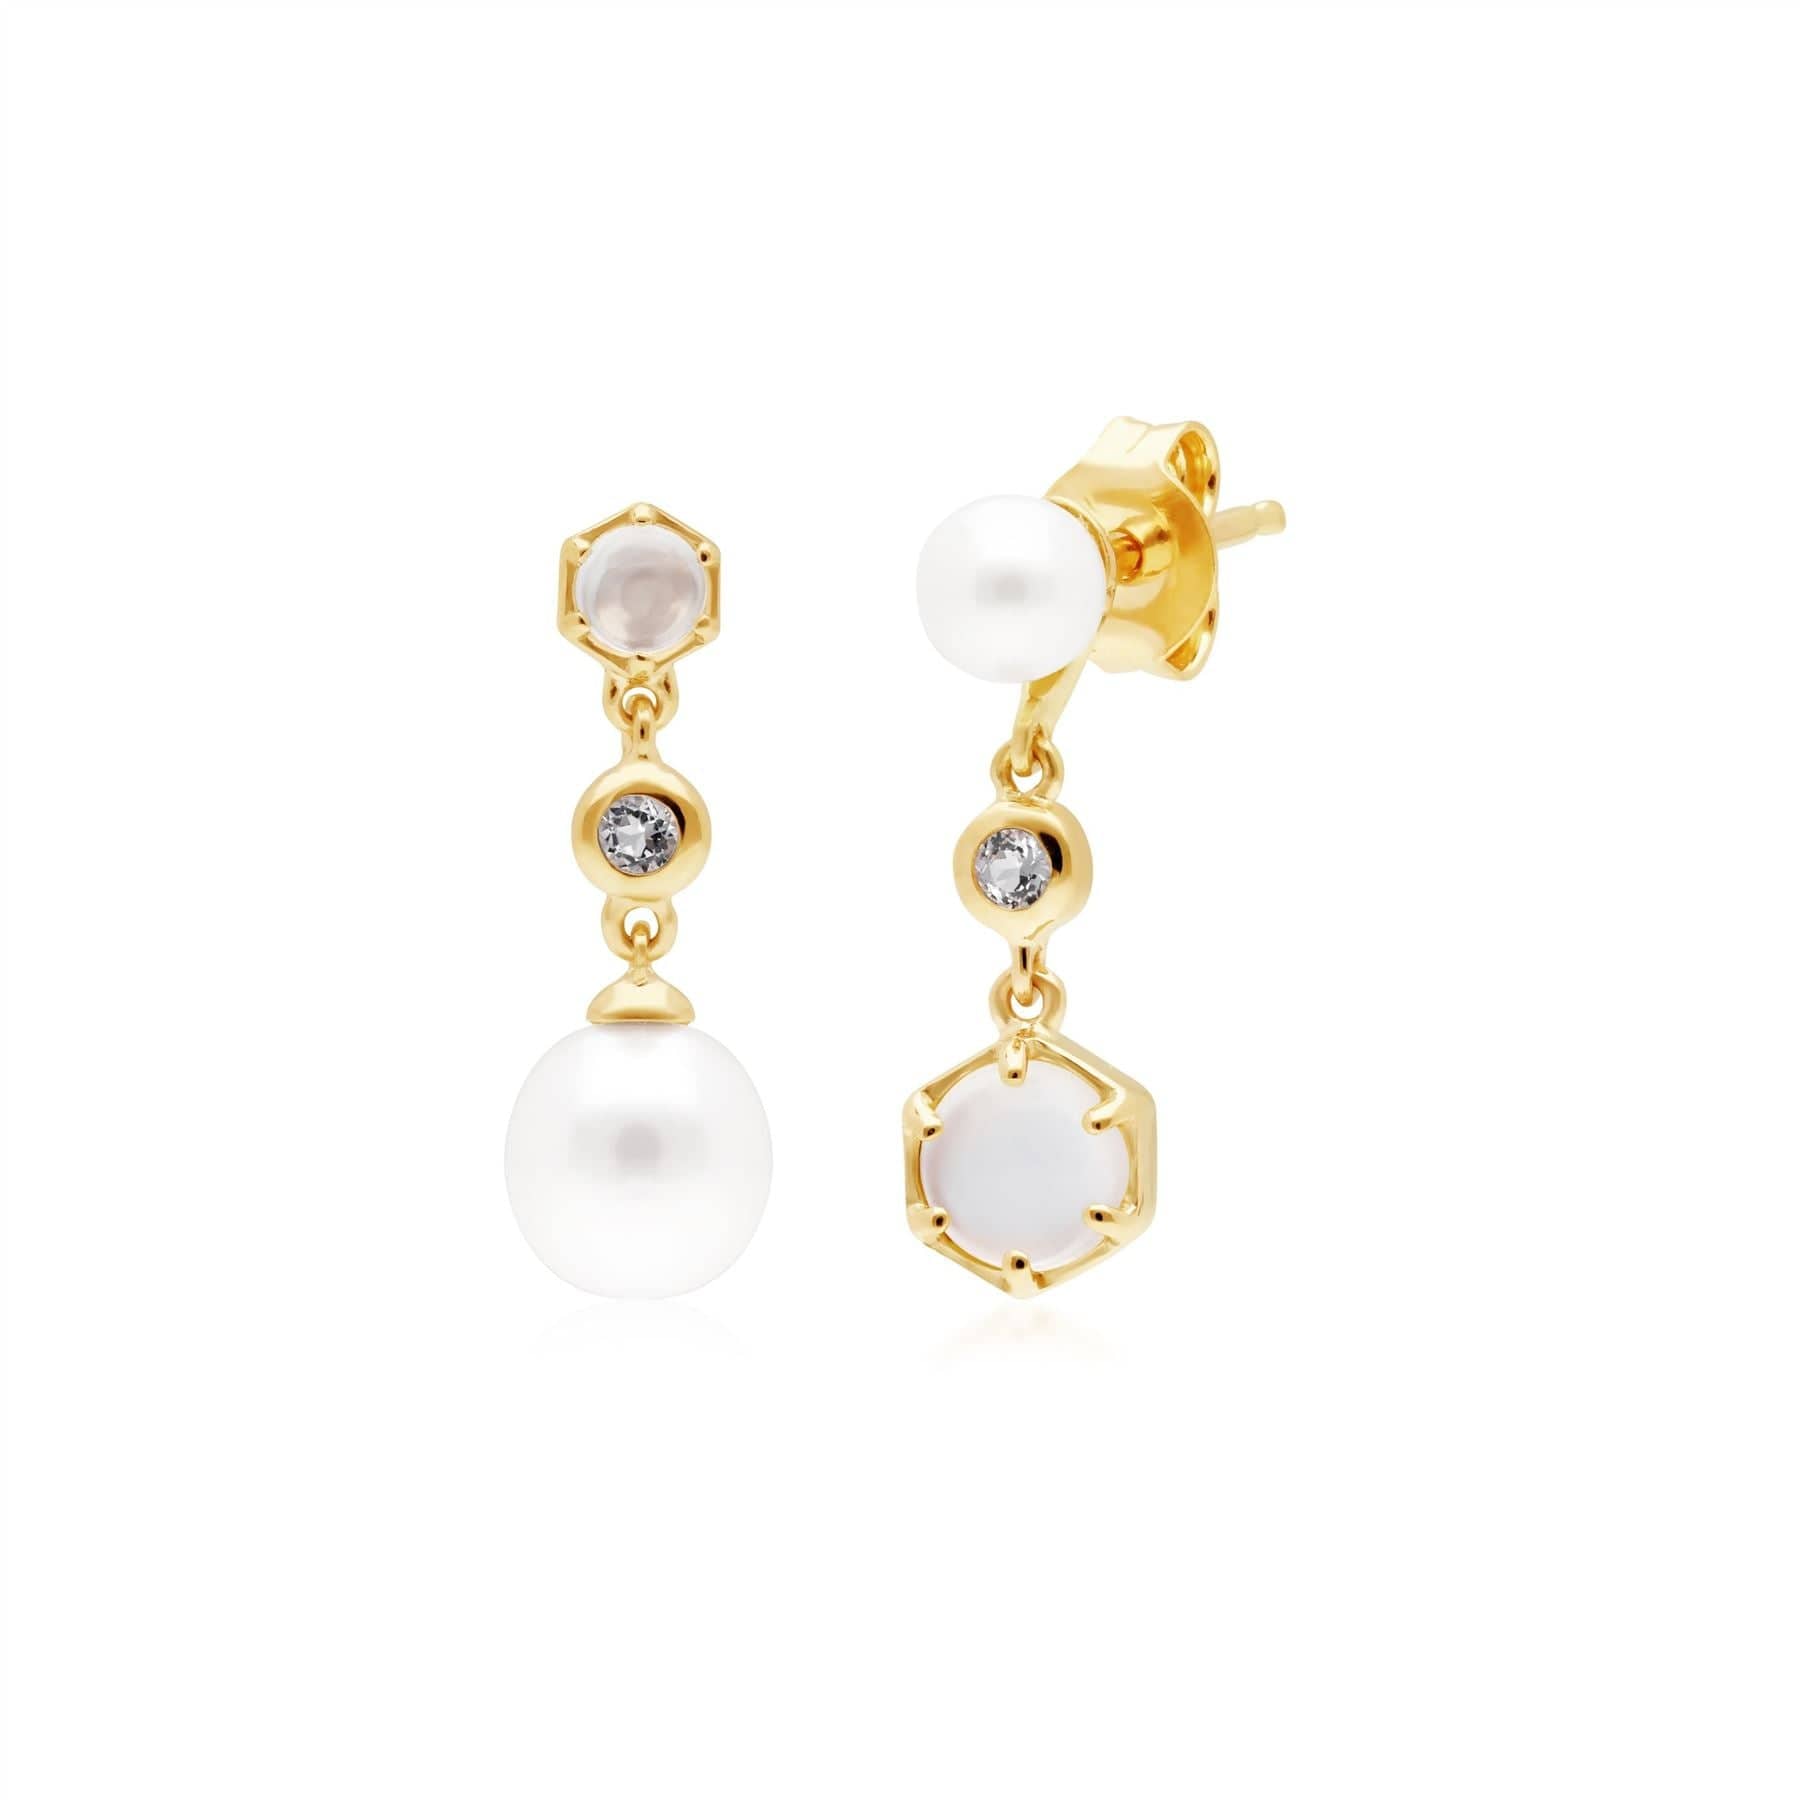 Modern Pearl, Moonstone & Topaz Mismatched Drop Earrings in Gold Plated Silver